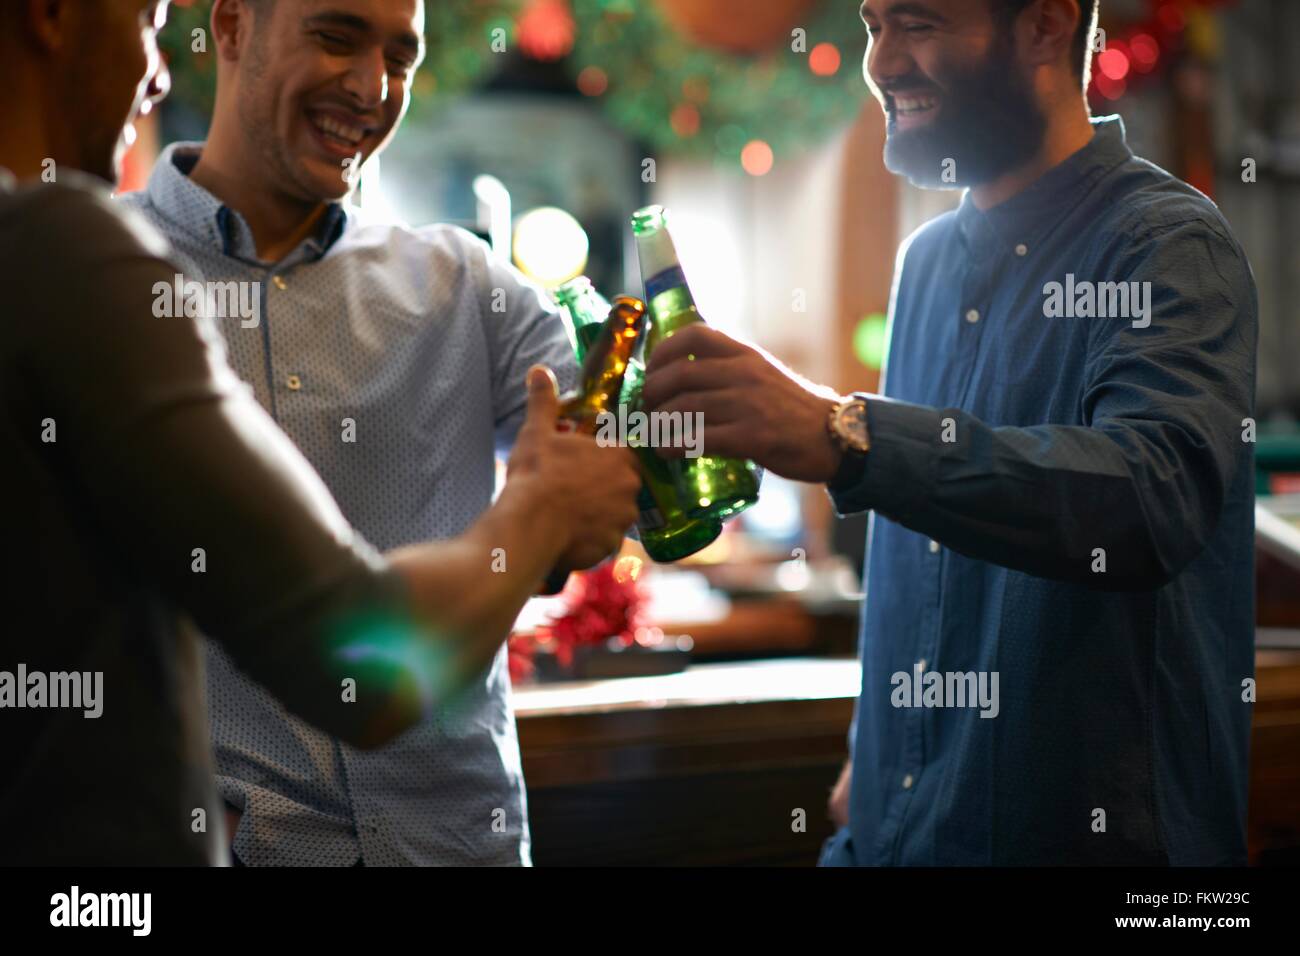 Friends in public house making a toast Stock Photo